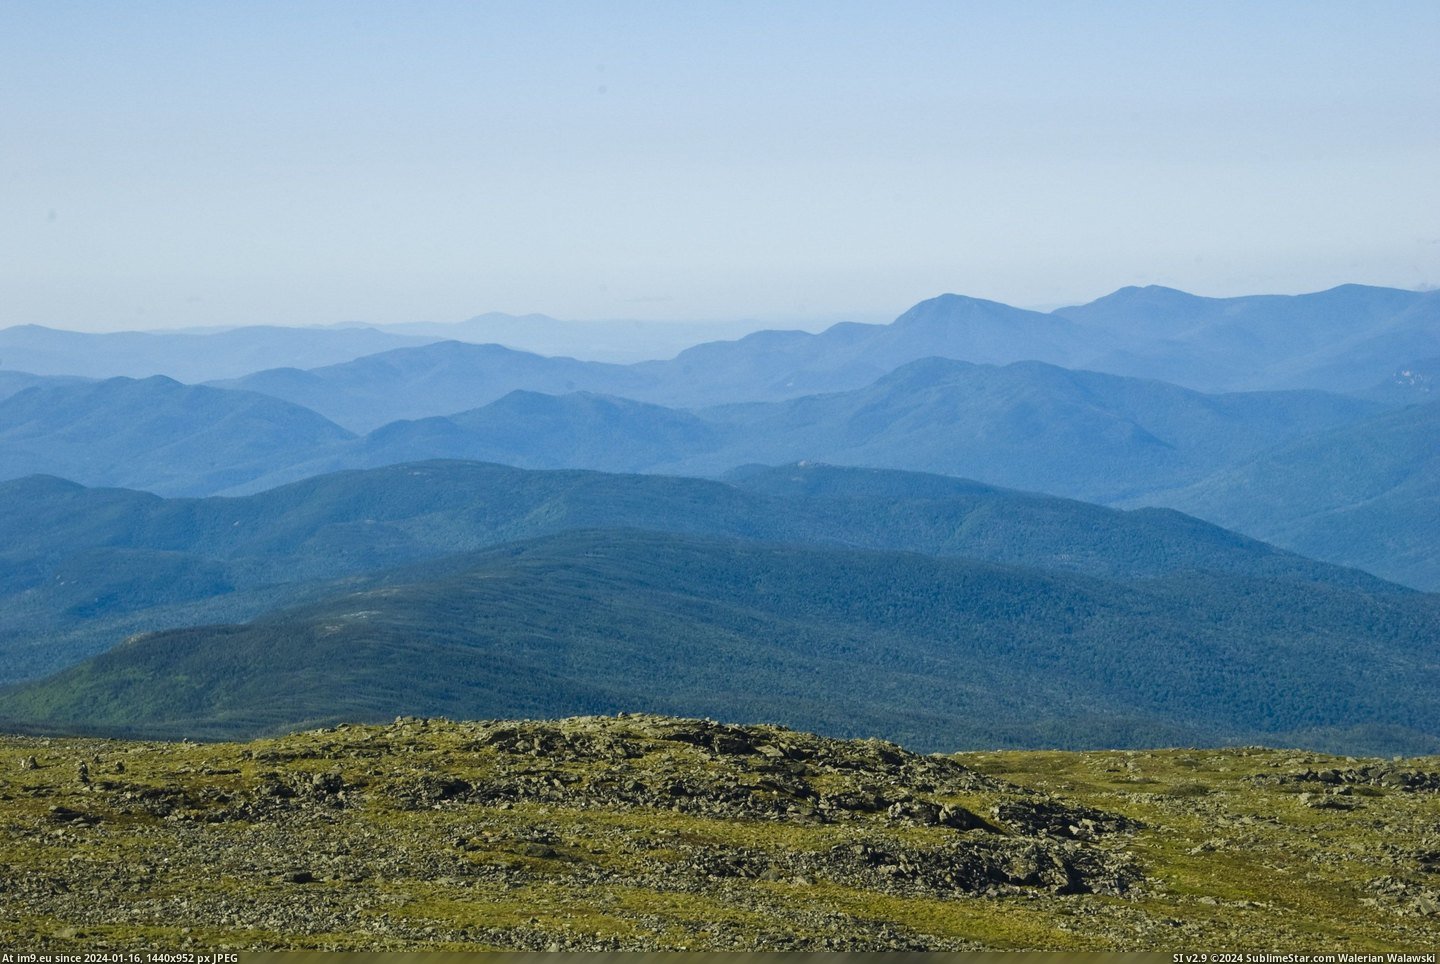 #Distance #Mount #Rare #Summit #Judge #3008x2000 #Washington #Range #Mile [Earthporn] The rare 100-mile view from the summit of Mount Washington, NH [3008x2000]- (they judge distance by which range you  Pic. (Image of album My r/EARTHPORN favs))